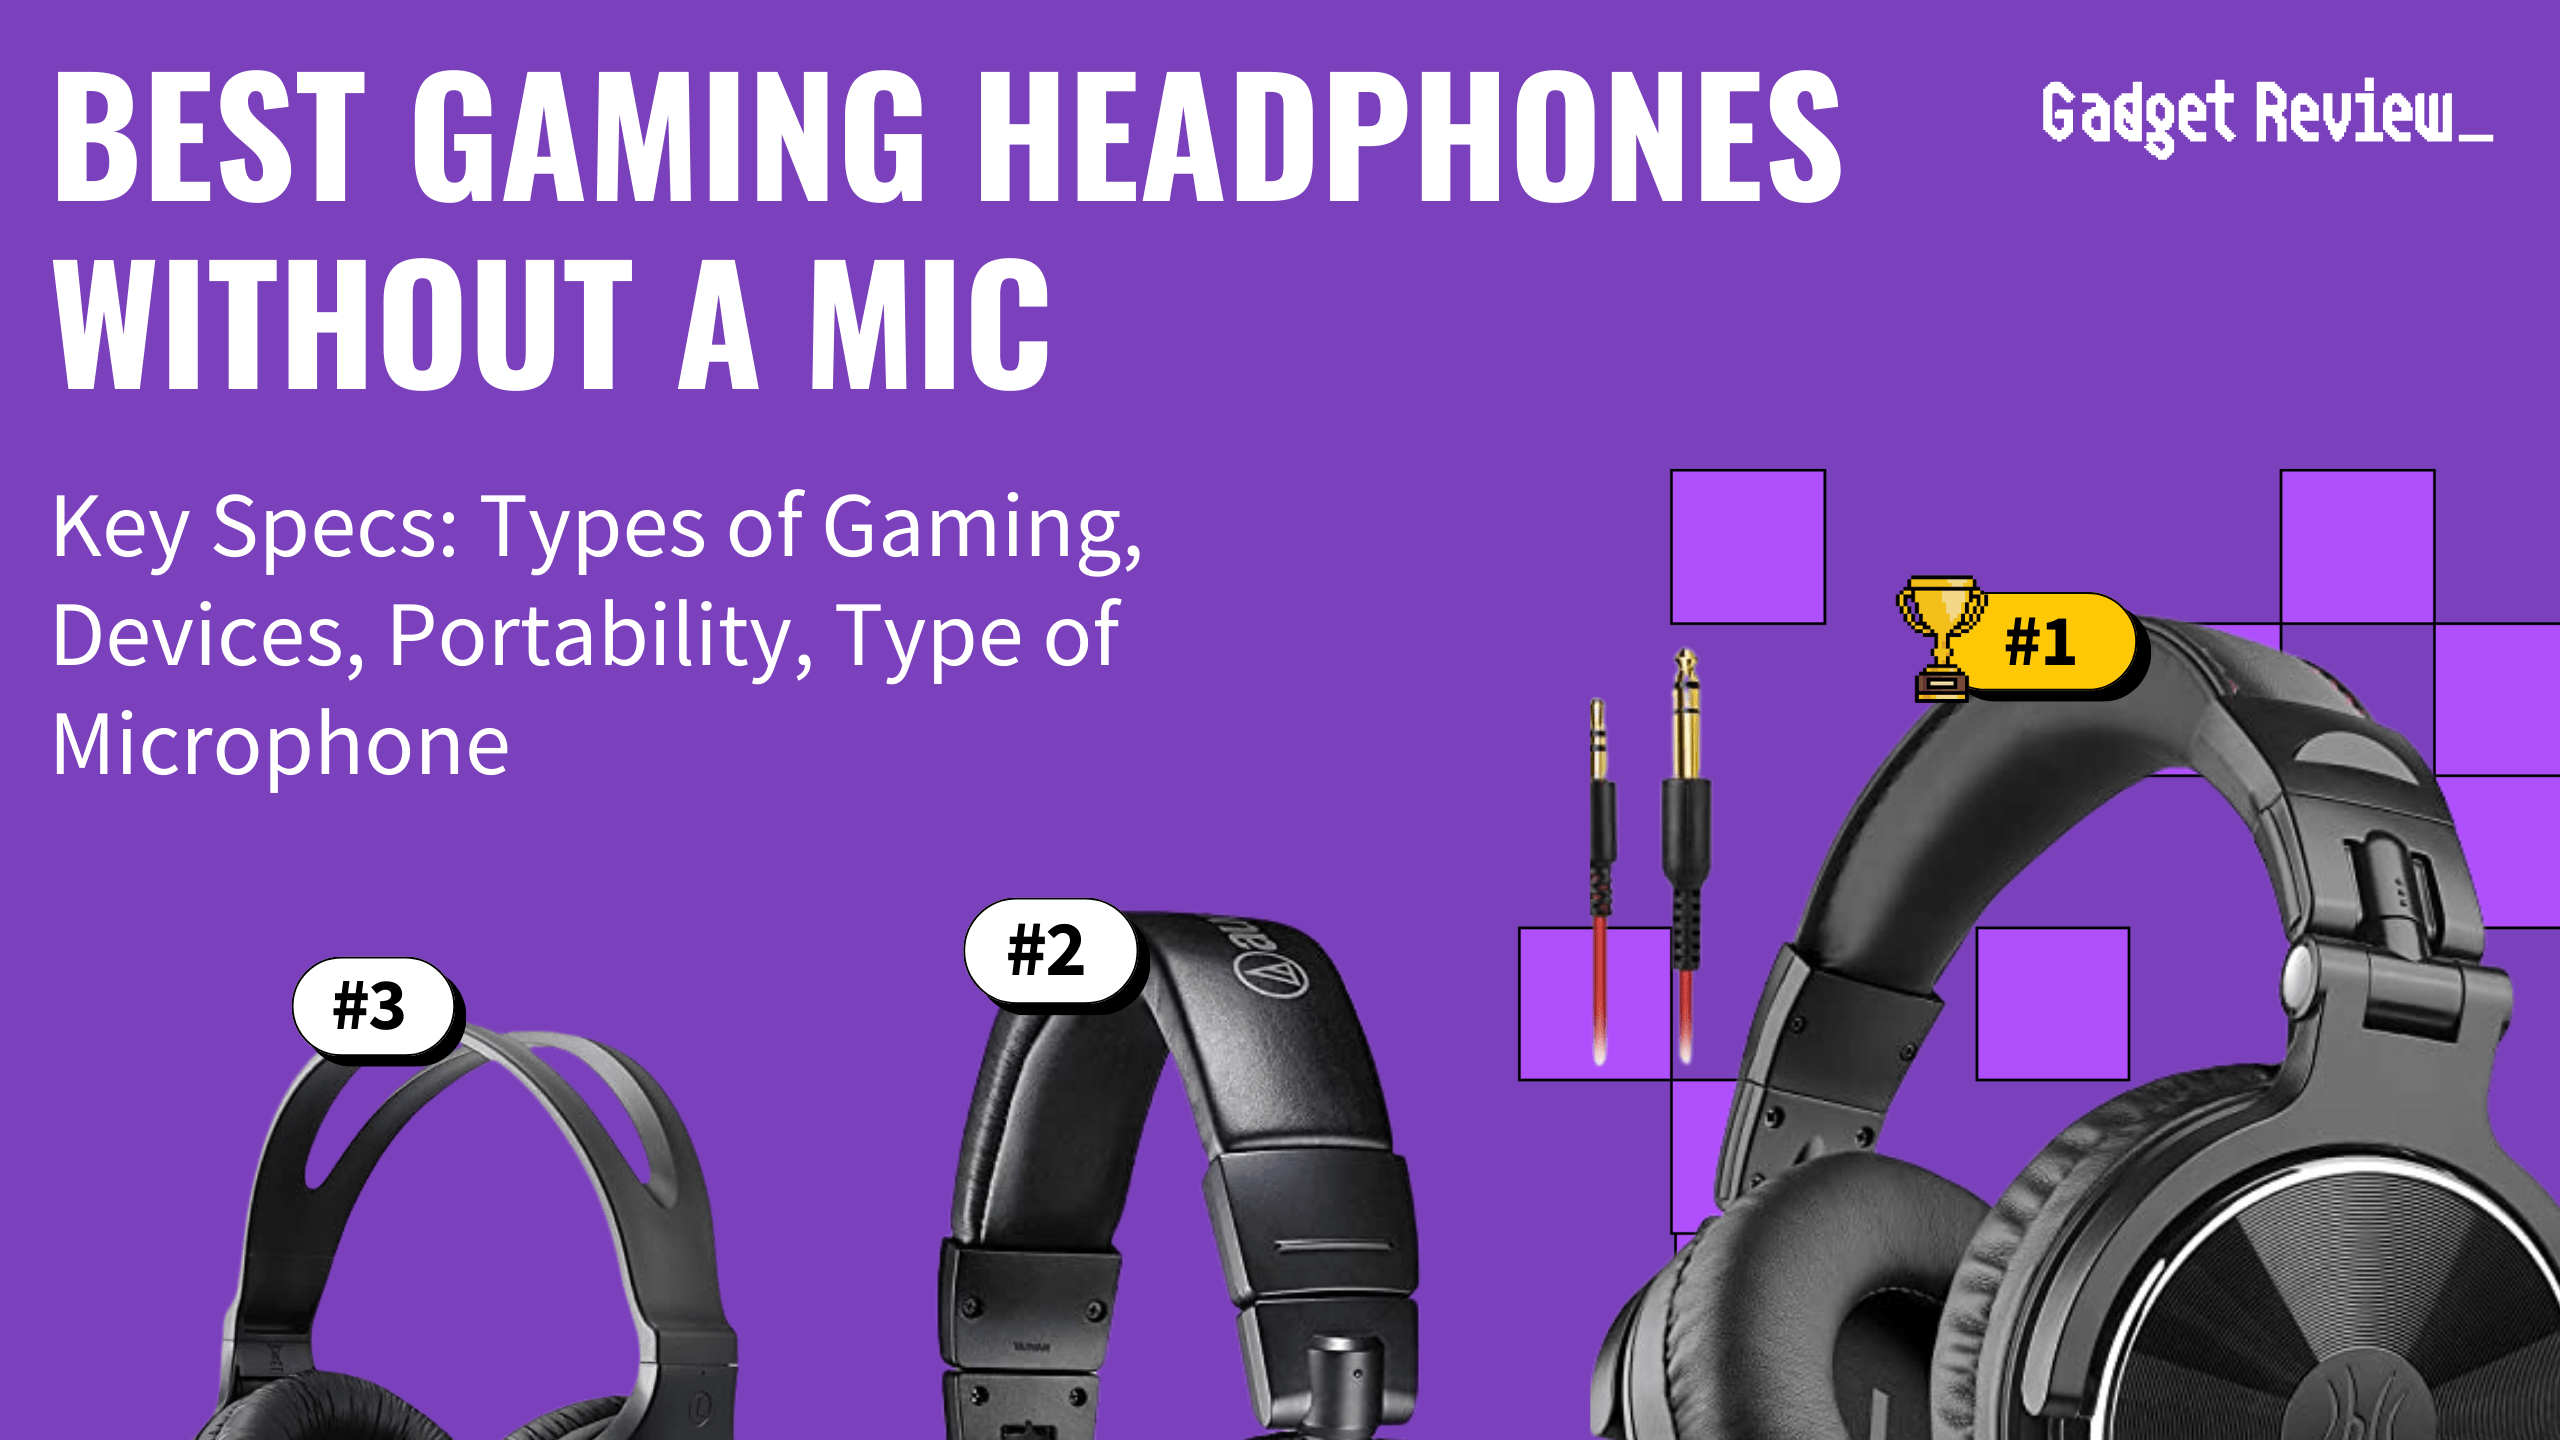 best gaming headphones without mic featured image that shows the top three best gaming headset models